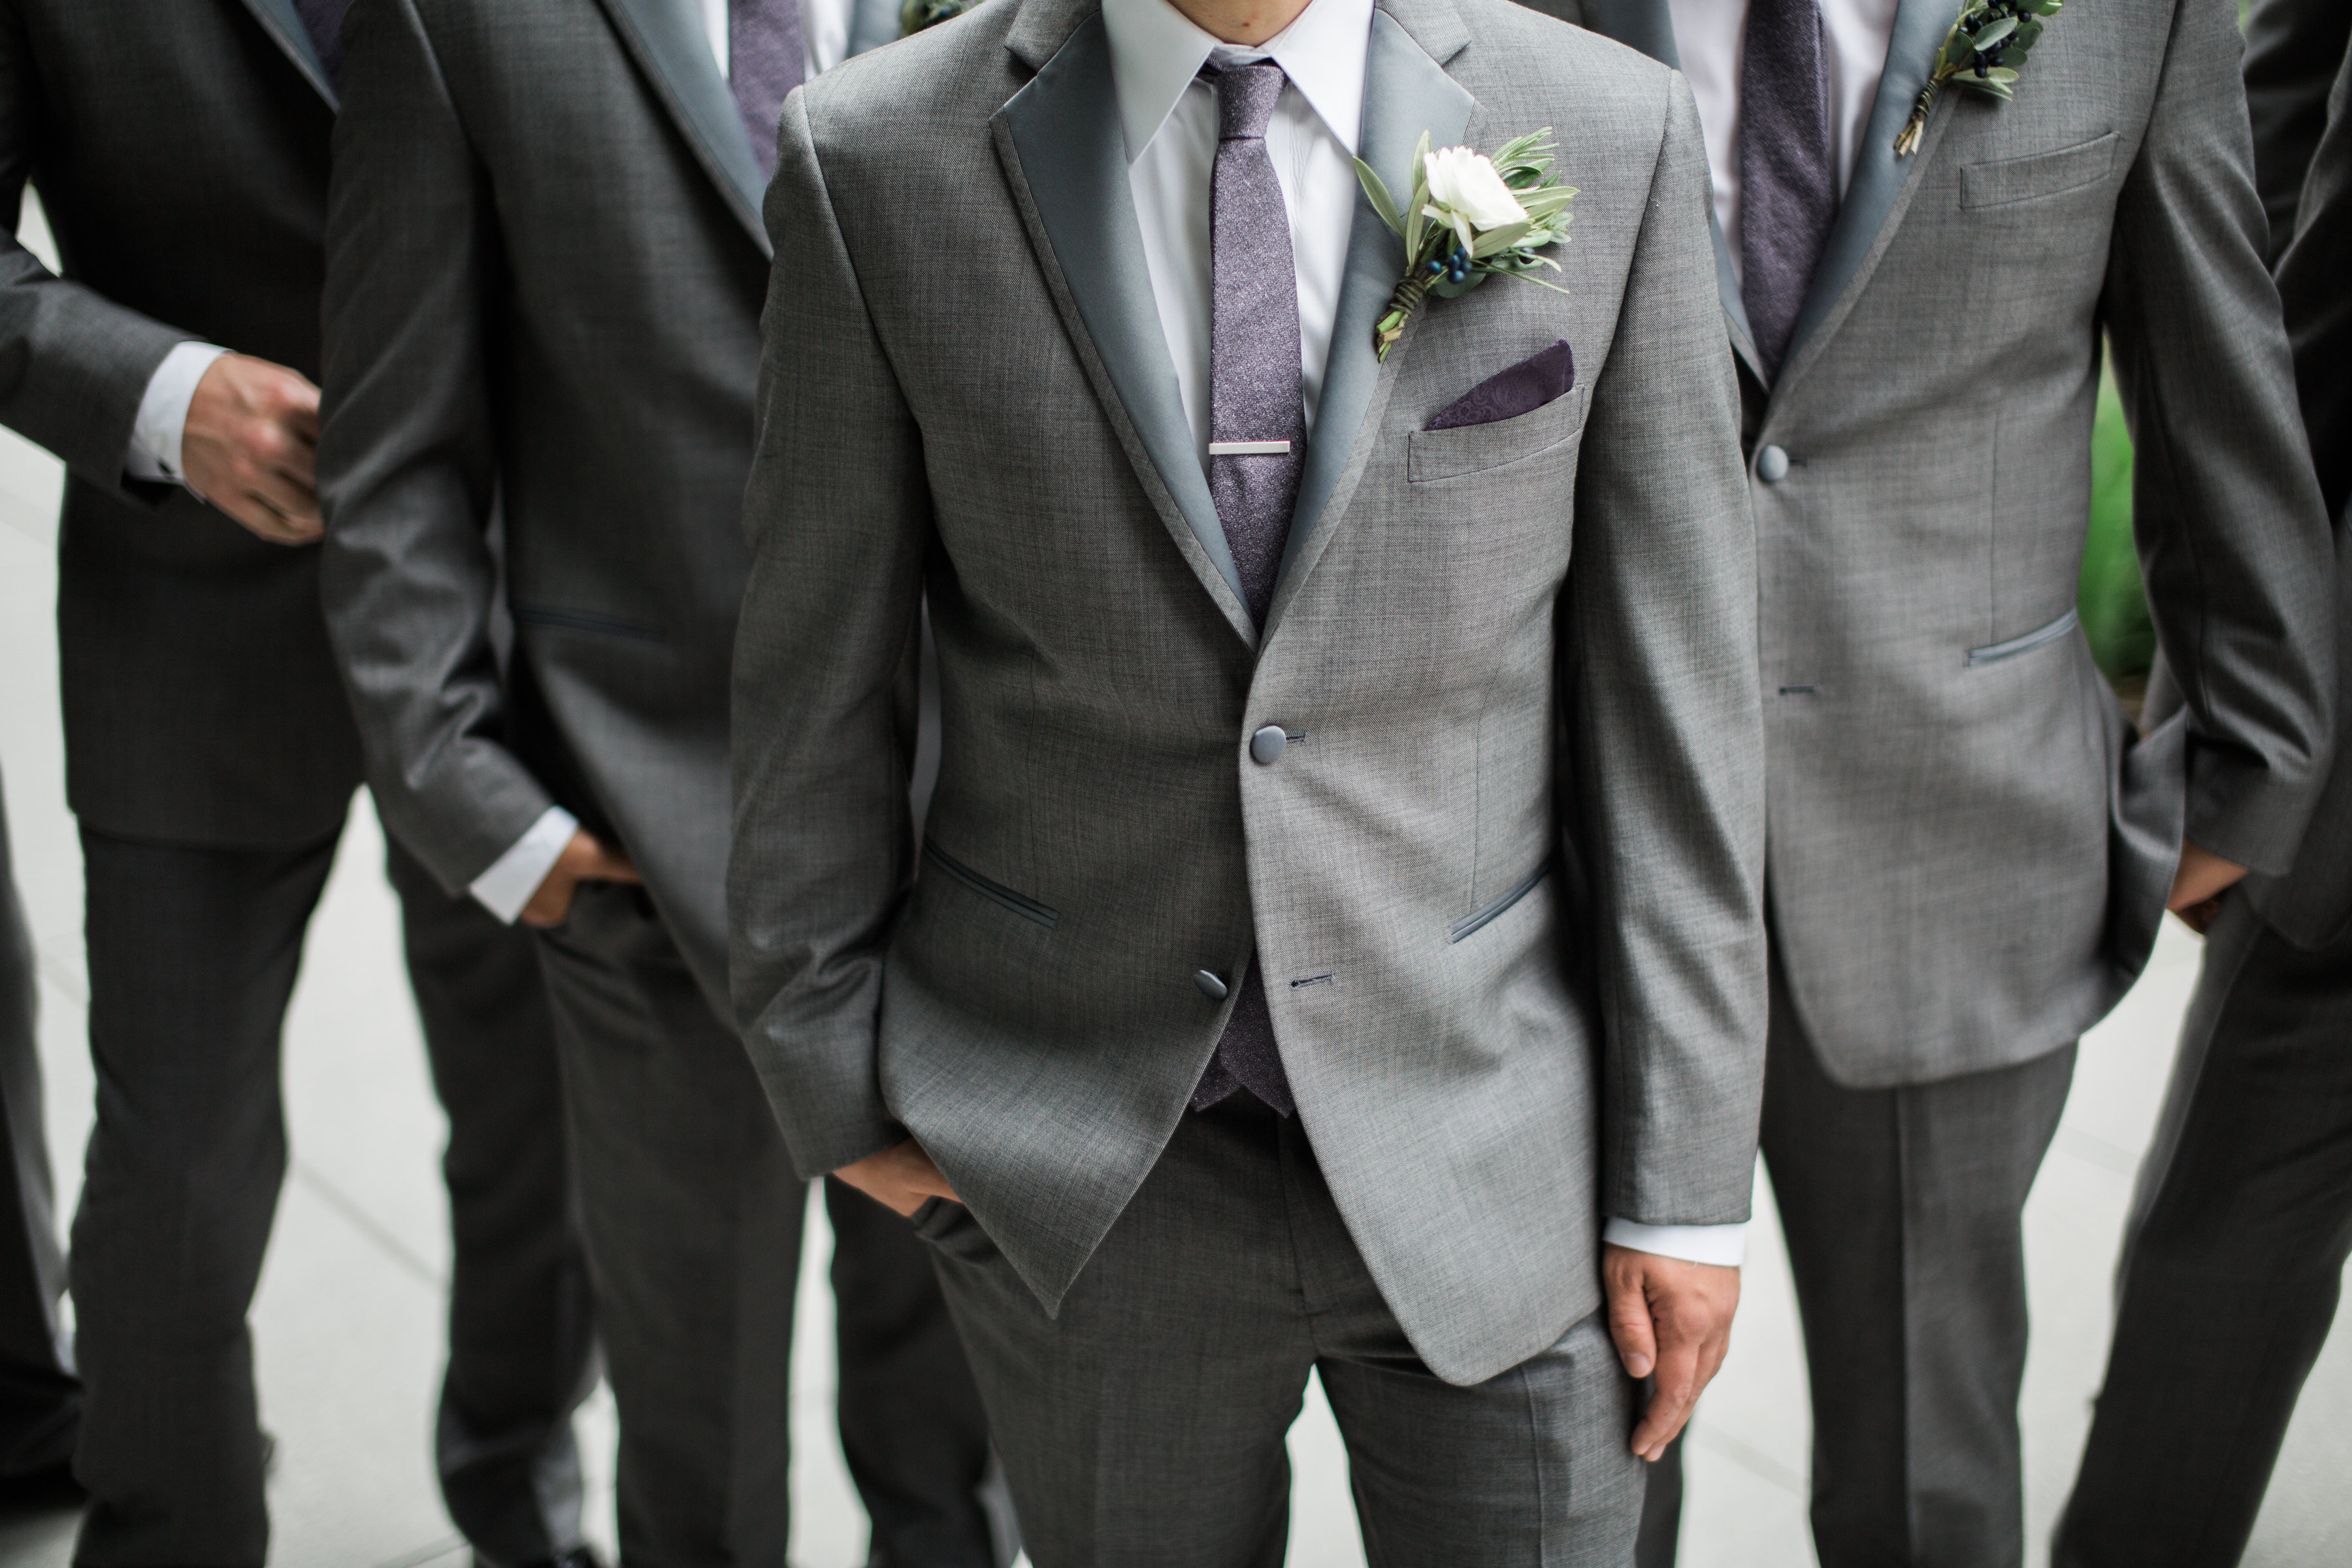 groom in grey suit with eggplant tie and boutonniere